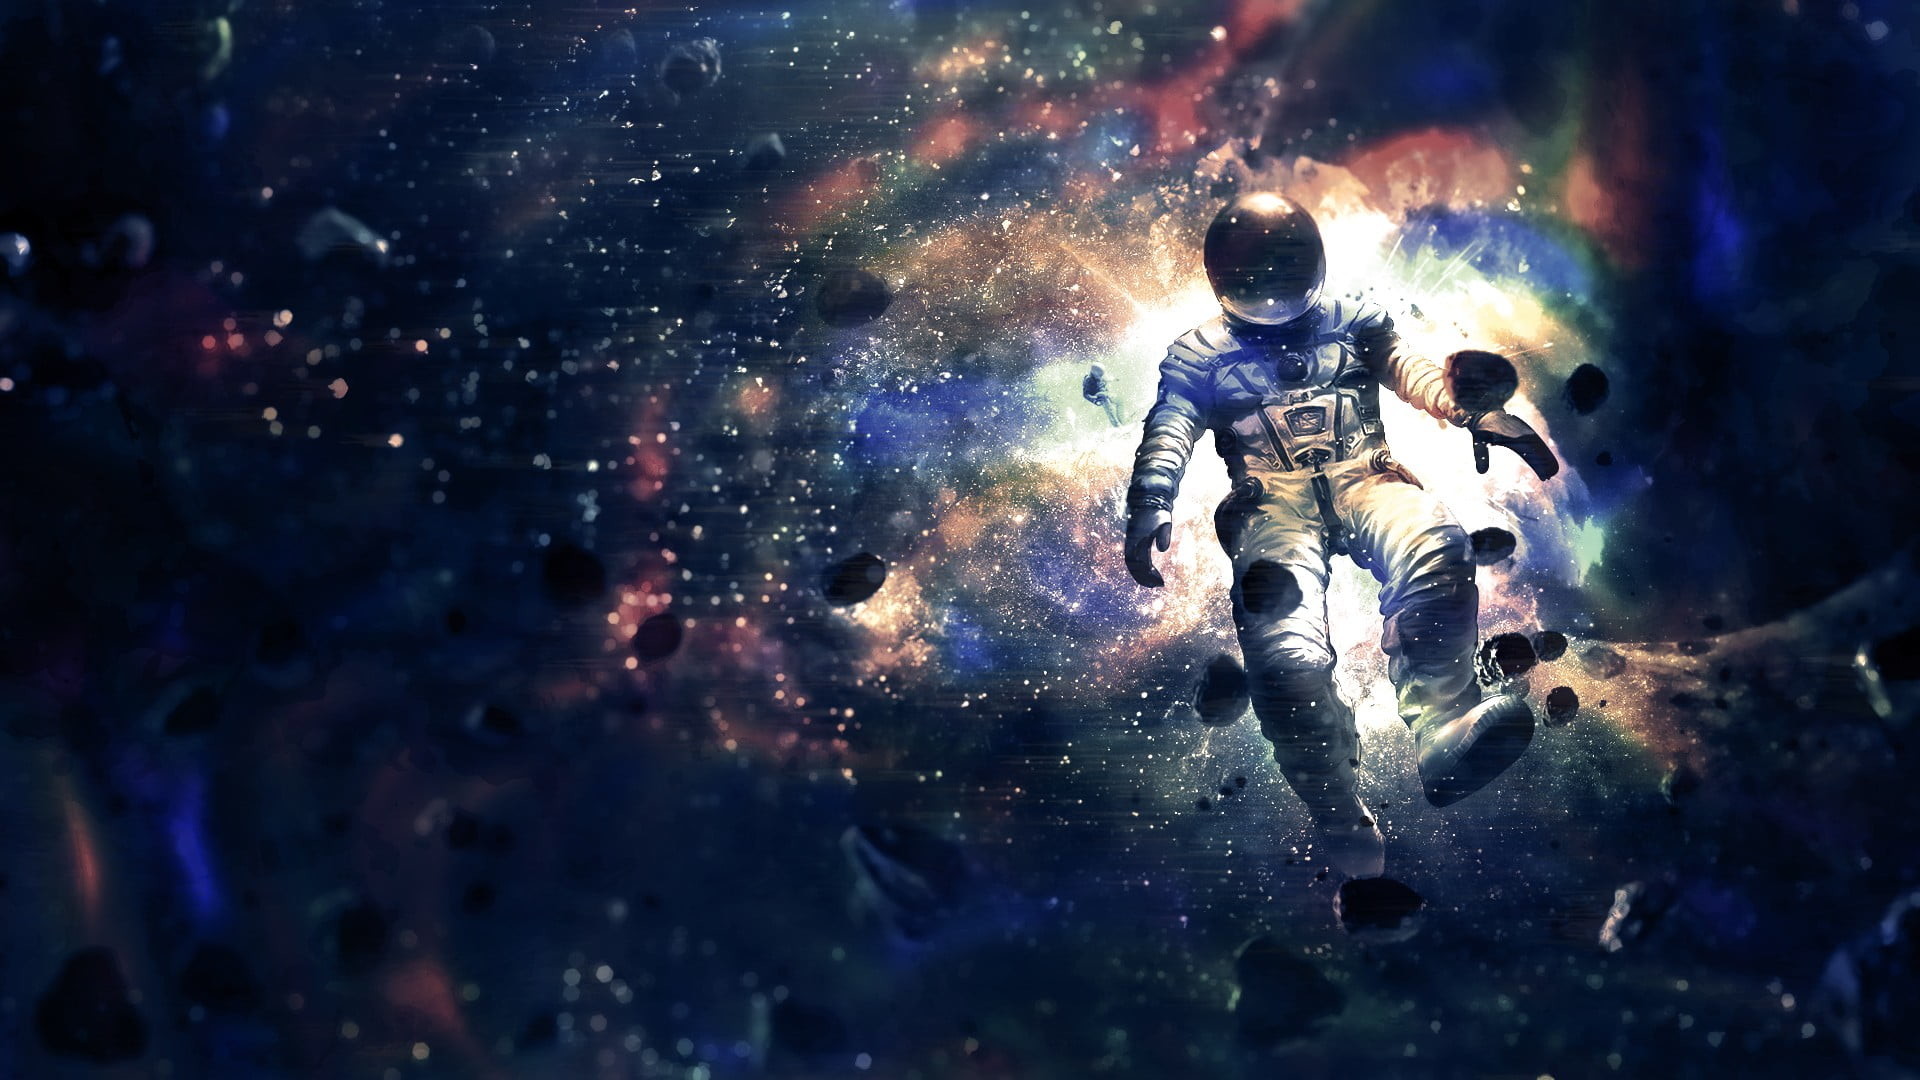 1920x1080 astronaut on space wallpaper, LSD, drugs, front view, nature